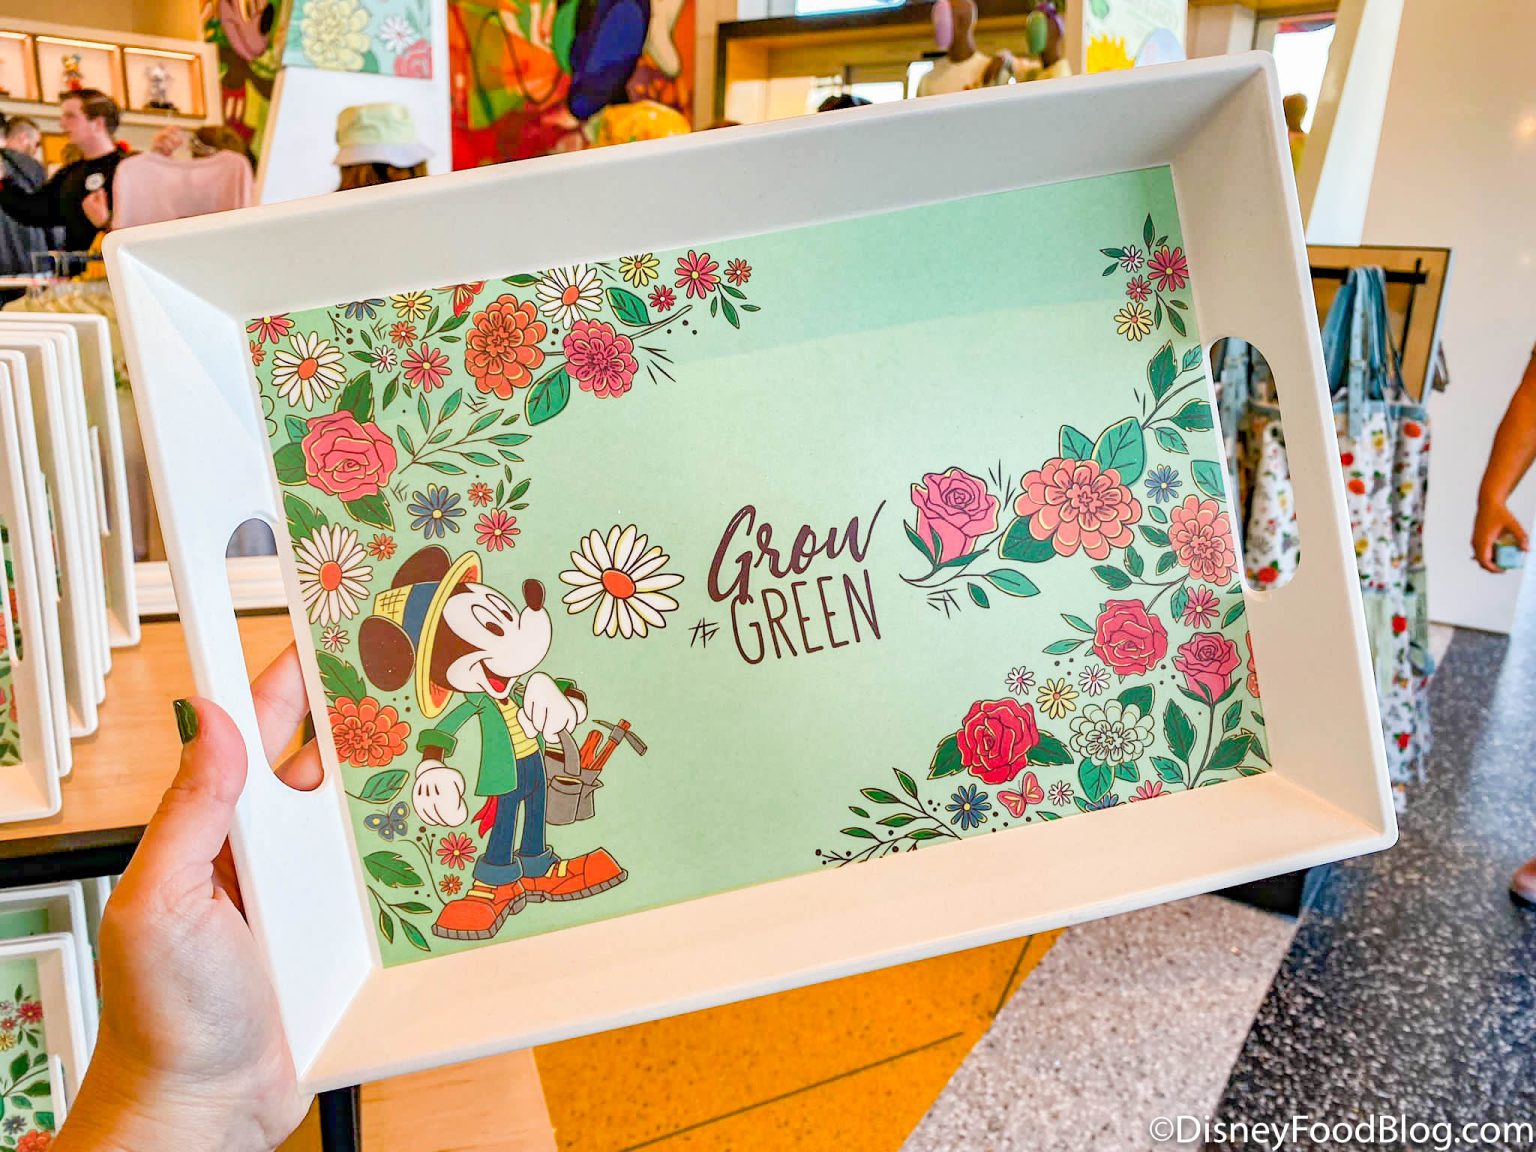 PHOTOS ALL of the 2022 EPCOT Flower and Garden Festival Merchandise